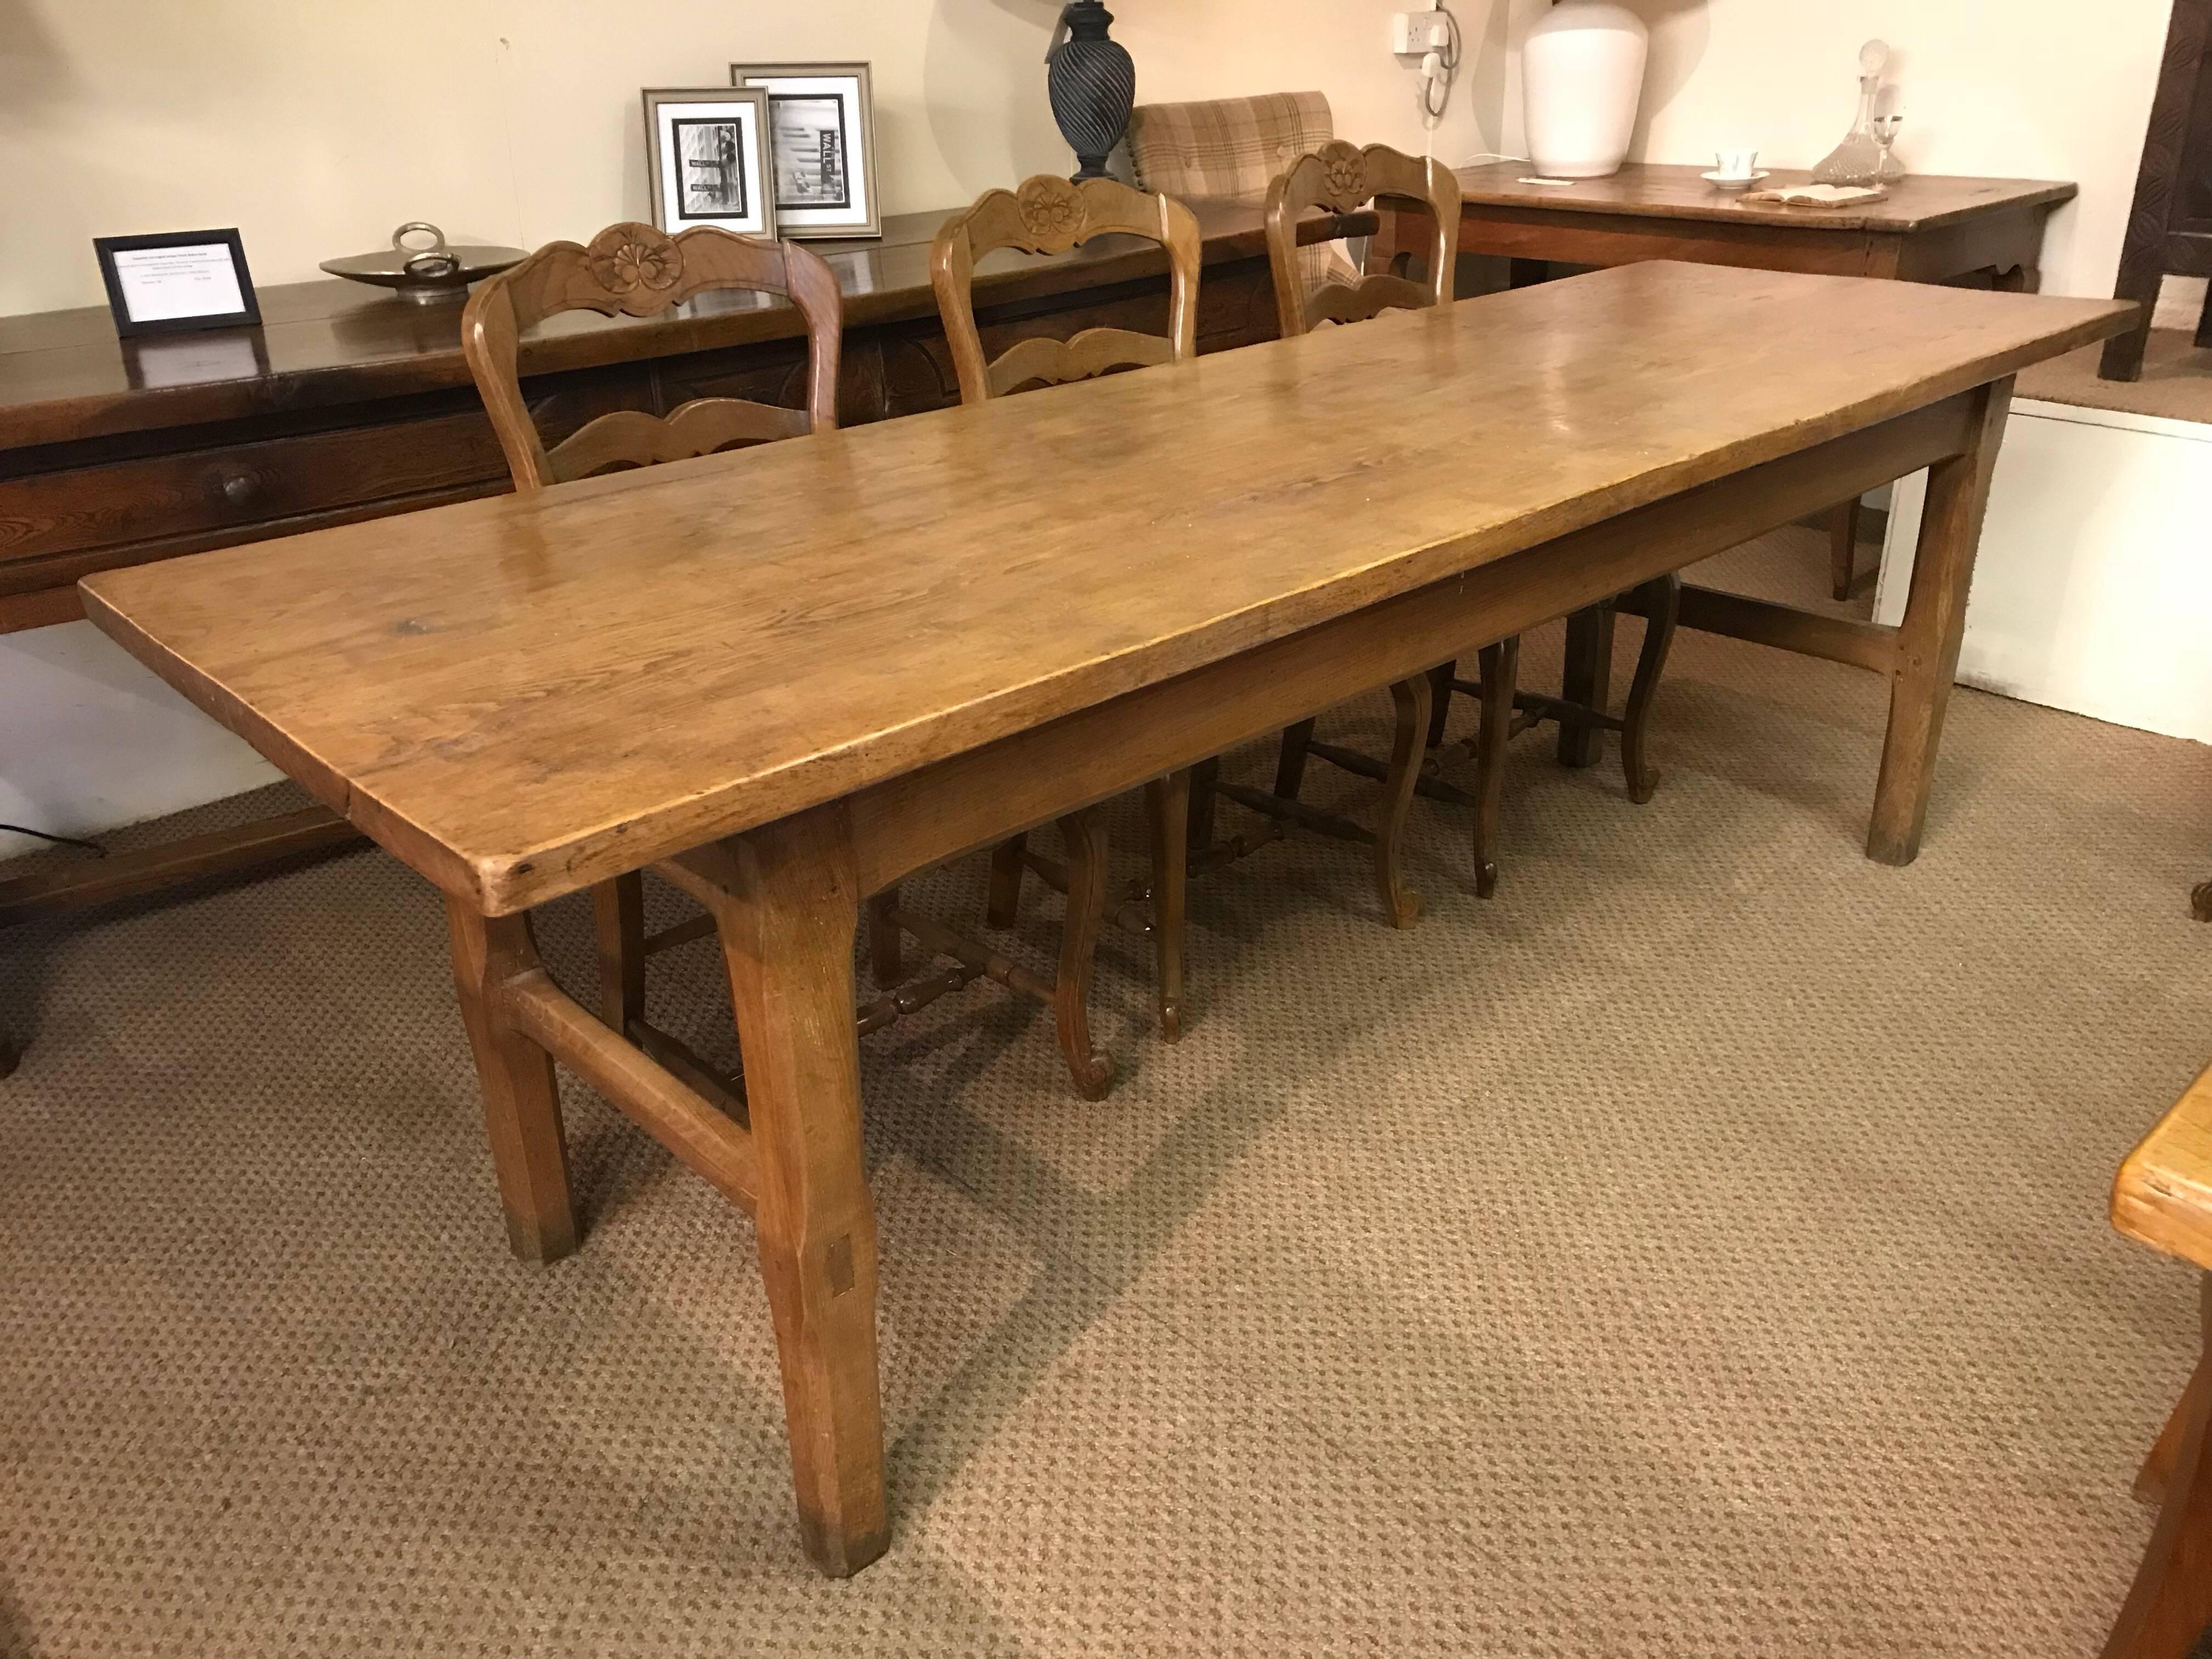 This ash pale French farmhouse table with a two plank top and sits on a sturdy frame with four square legs and end stretchers. Lovely color and patina. The table is circa 1840 and oozes character.